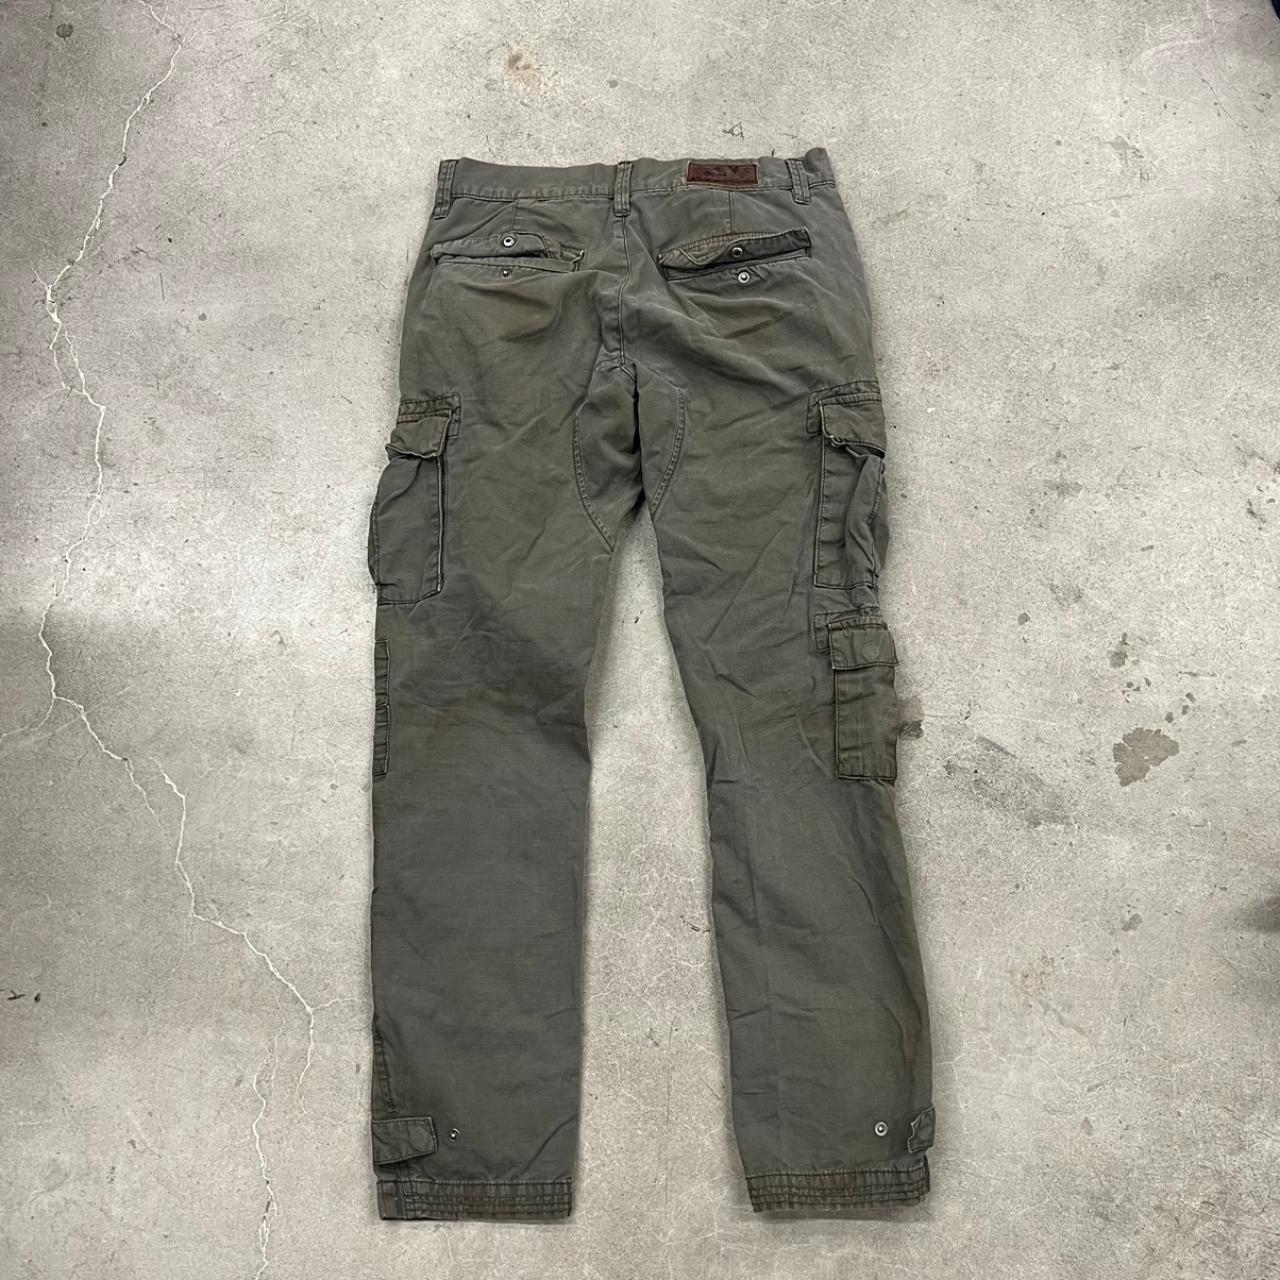 Vintage cargo pants on Depop by @sisifrommars